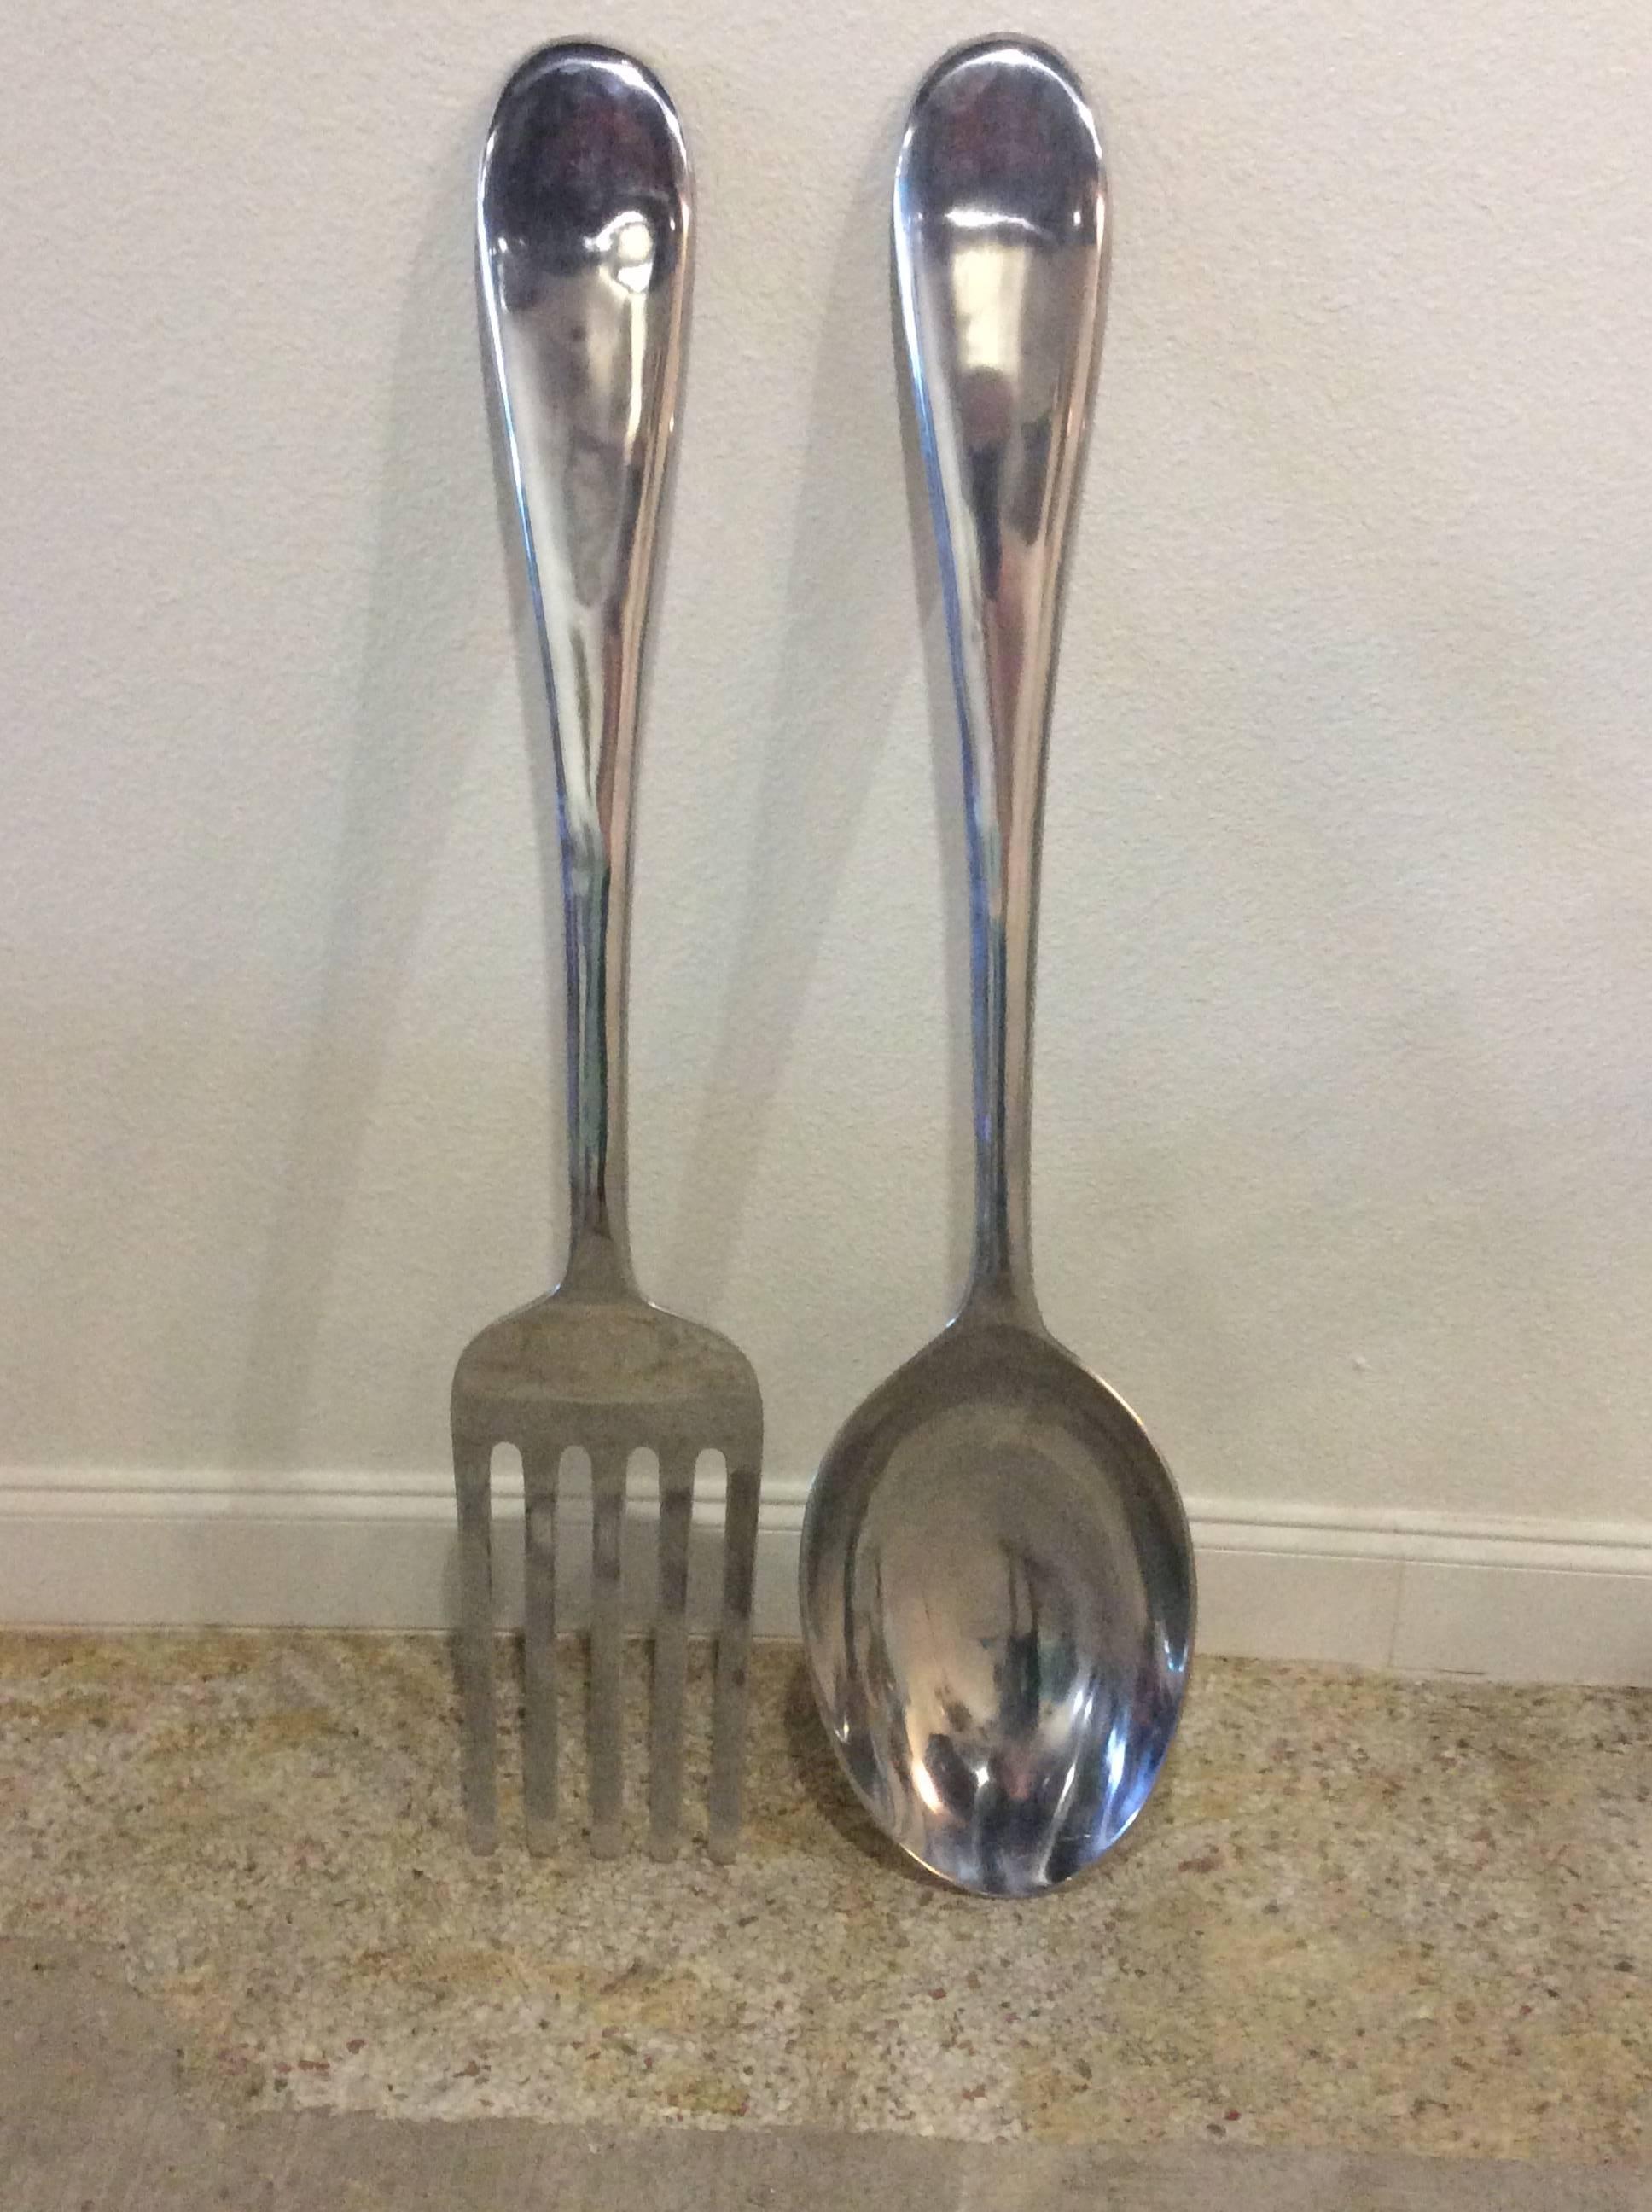 Vintage monumental oversized pair of chrome fork and spoon kitchen wall art in the manner of C. Jere. 
Spoon measures 46.5 T x 10.25 W x 3.5 D.
Fork size is below.

Hollywood Regency, Mid-Century Modern, retro., Palm Beach 